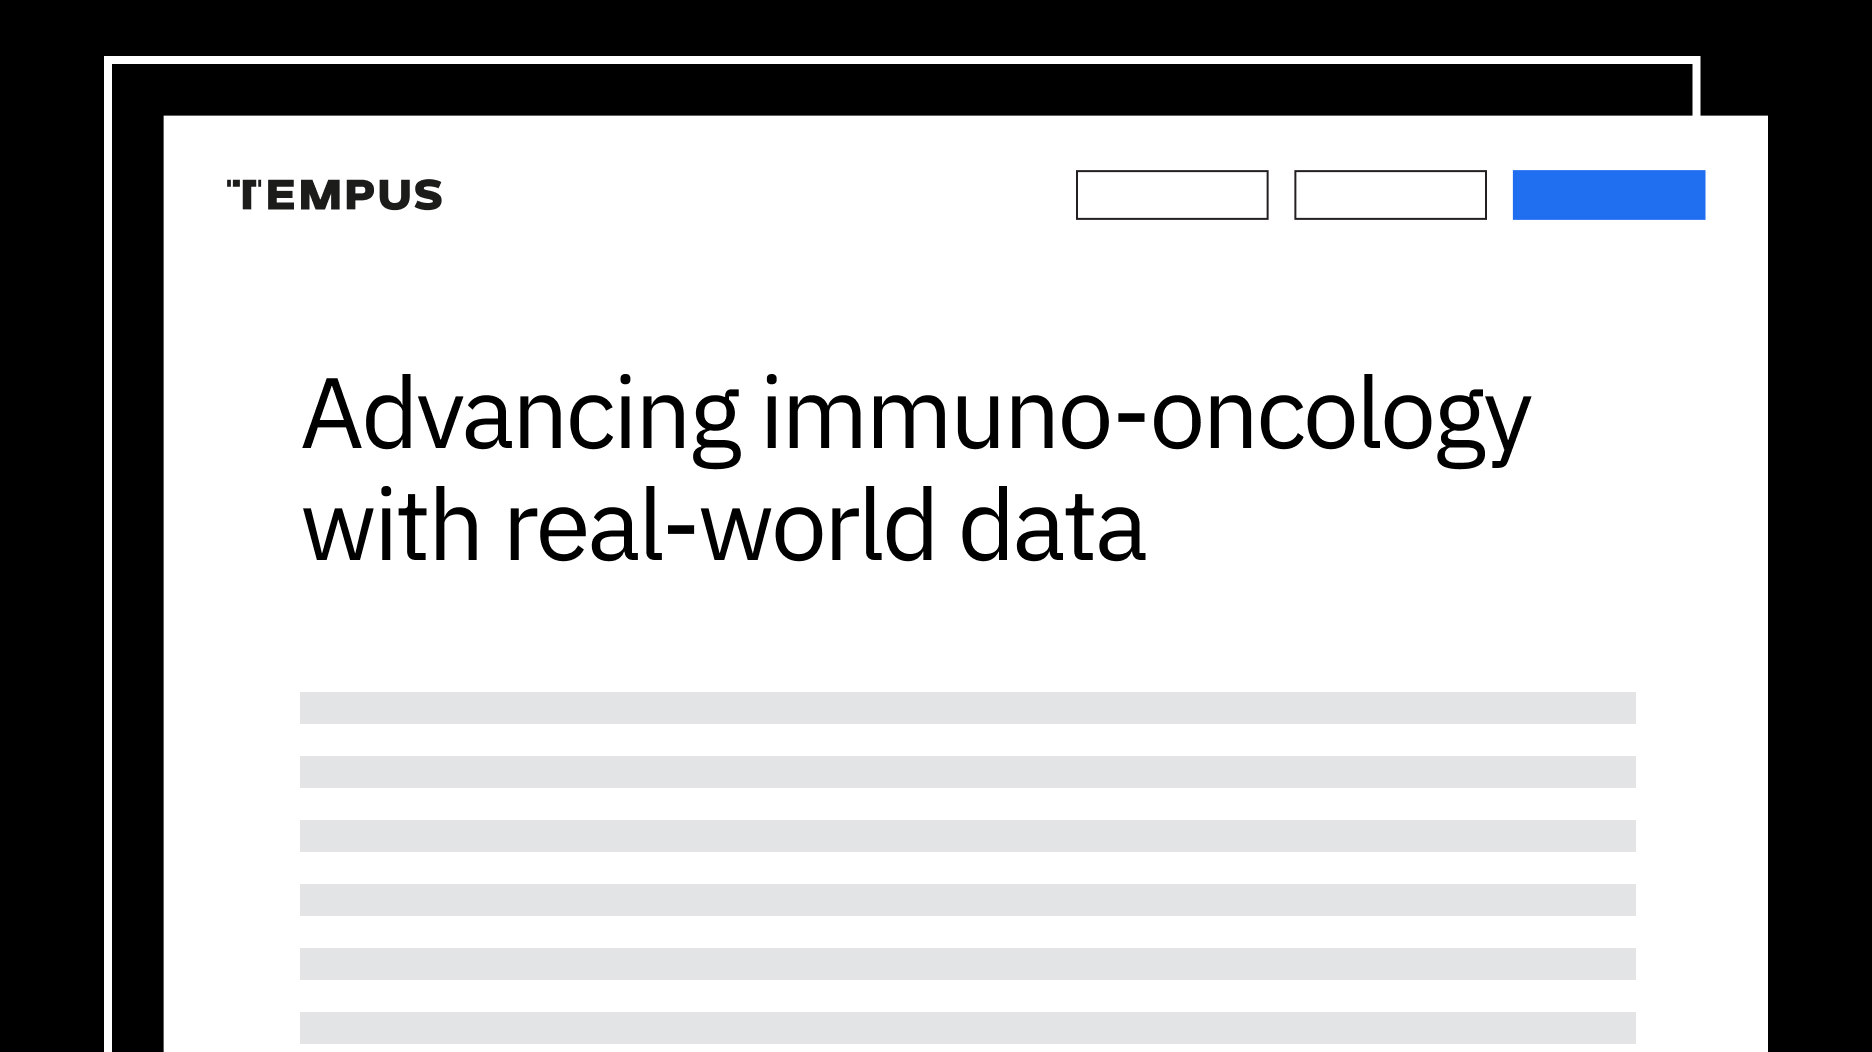 Advancing immuno-oncology with real-world data